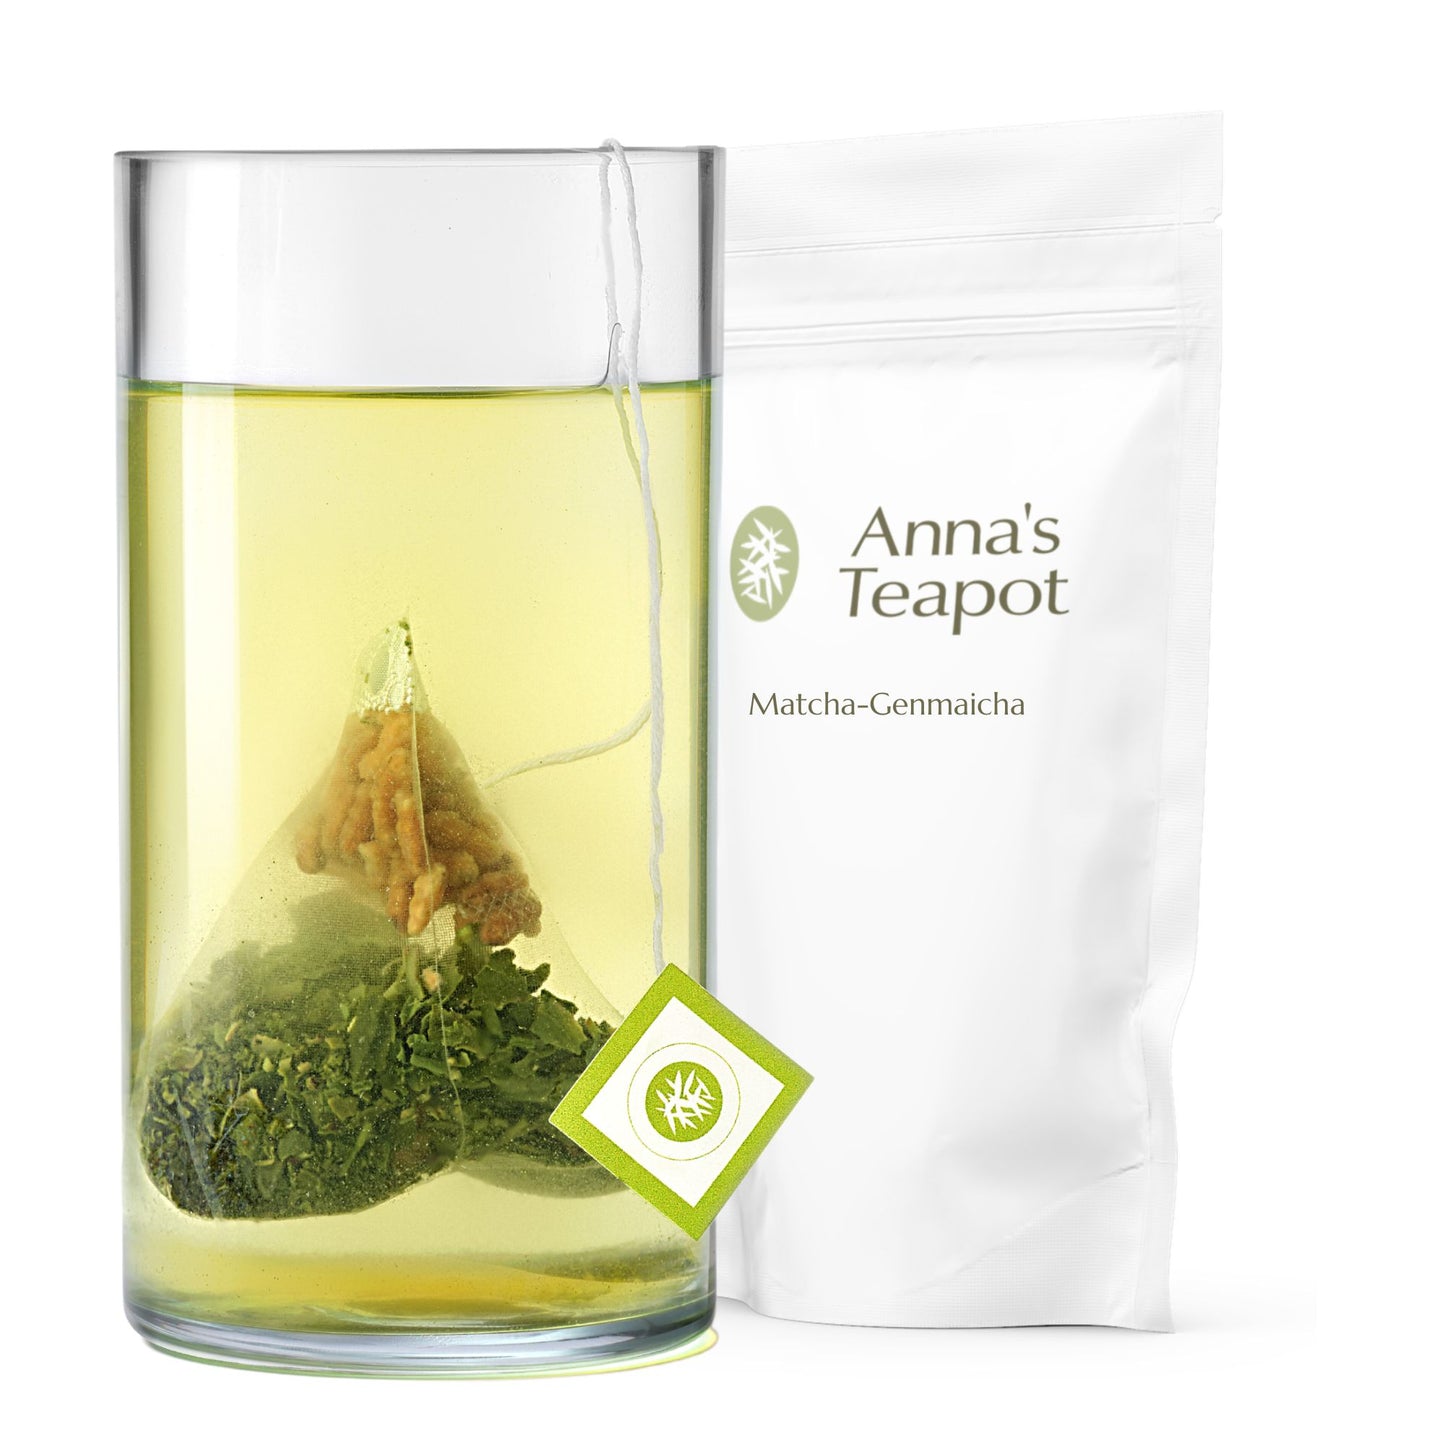 Anna's Teapot Organic Genmaicha with Matcha - 20 Pyramid Teabags in a Resealable Pouch